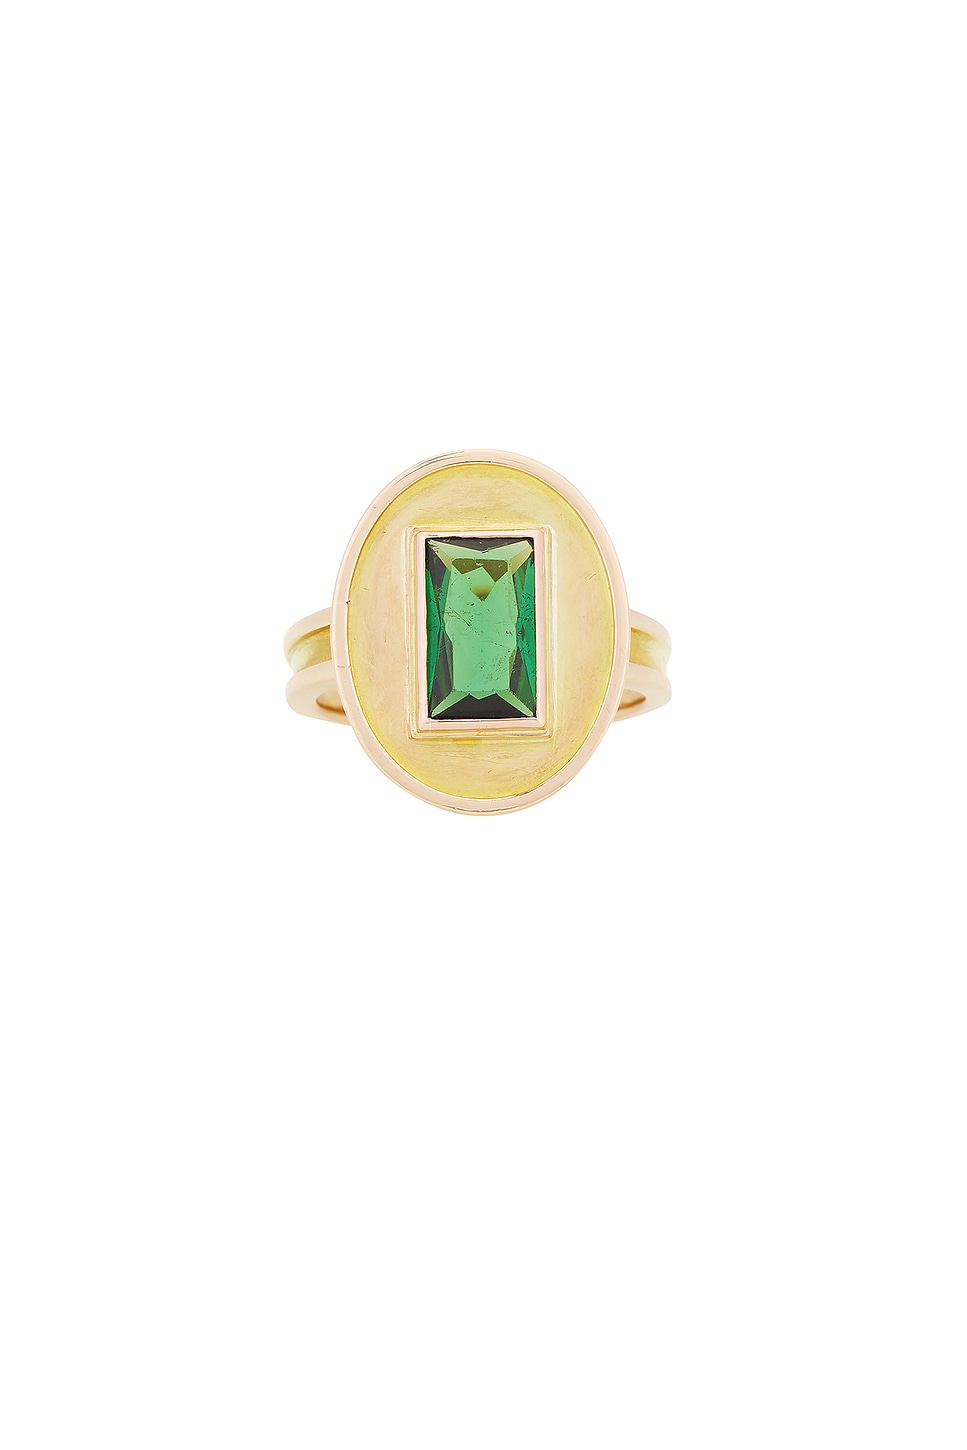 Image 1 of 23CARAT Vintage Deco Ring in Yellow Gold Byzantine & Green Tourmaline